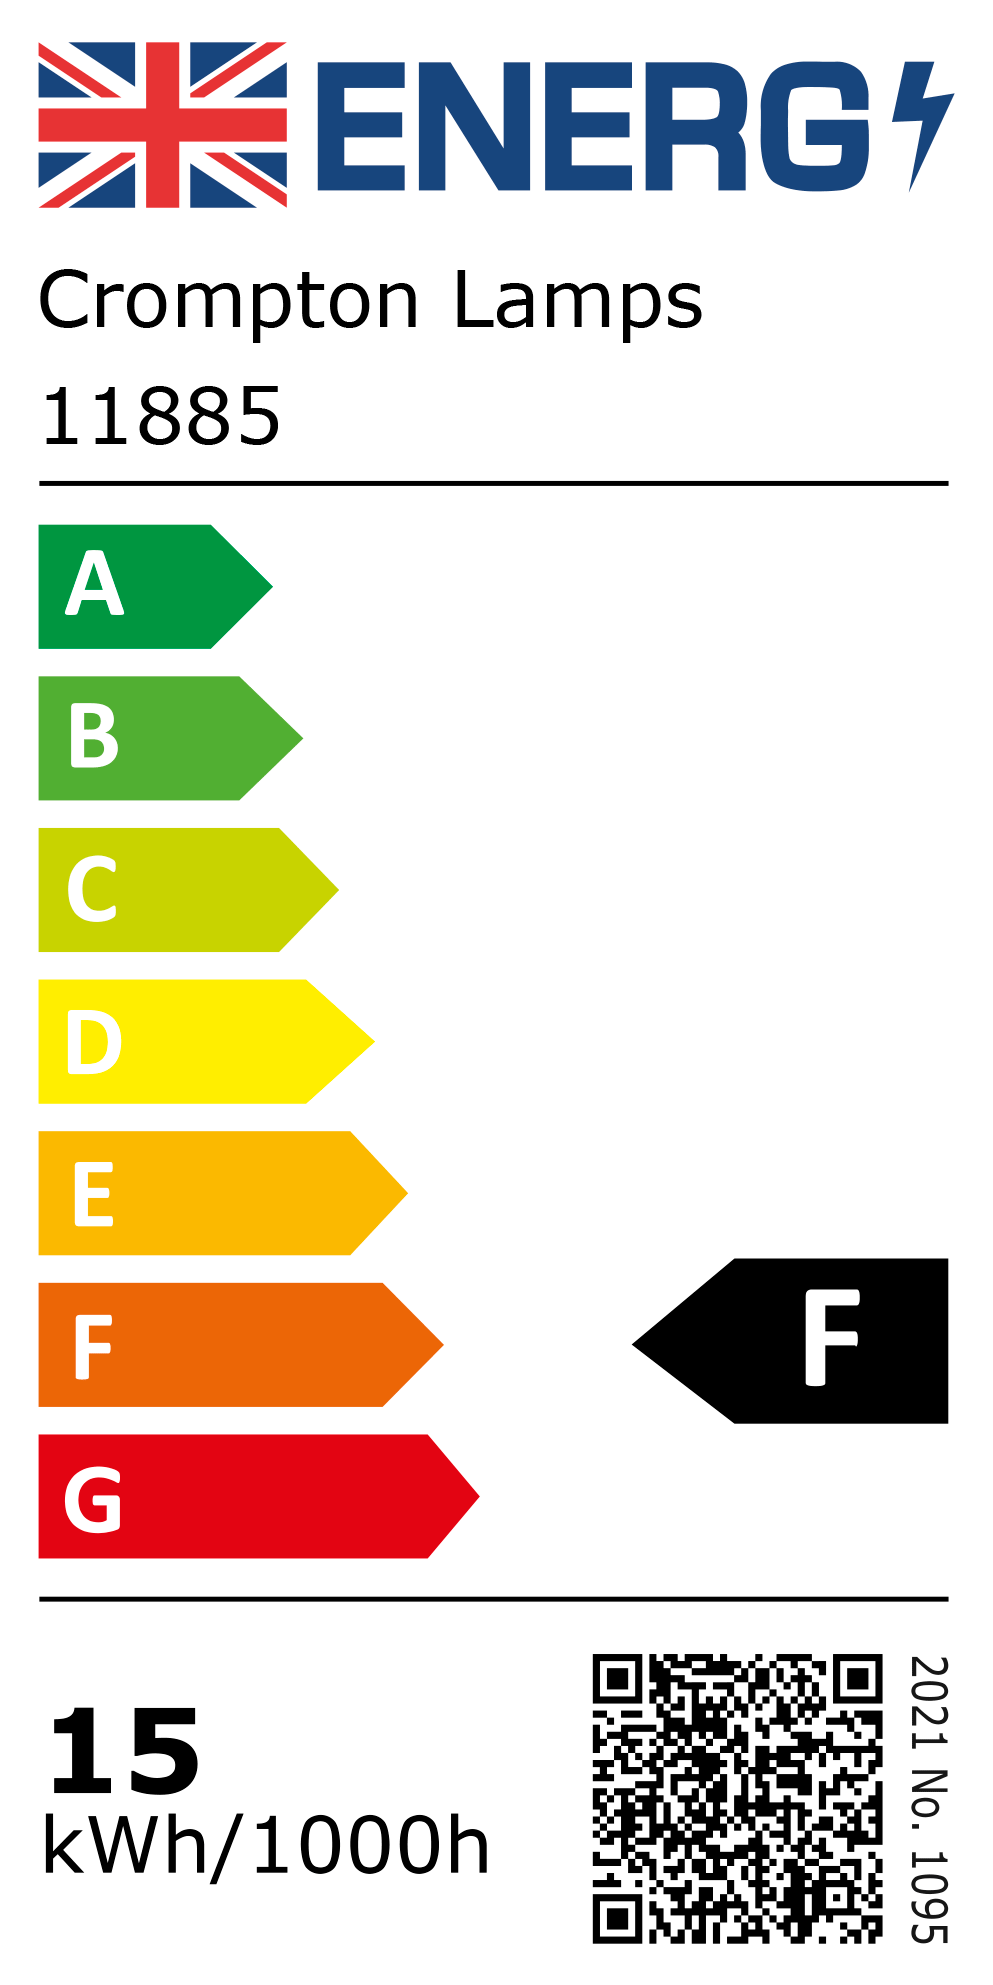 New 2021 Energy Rating Label: Stock Code 11885